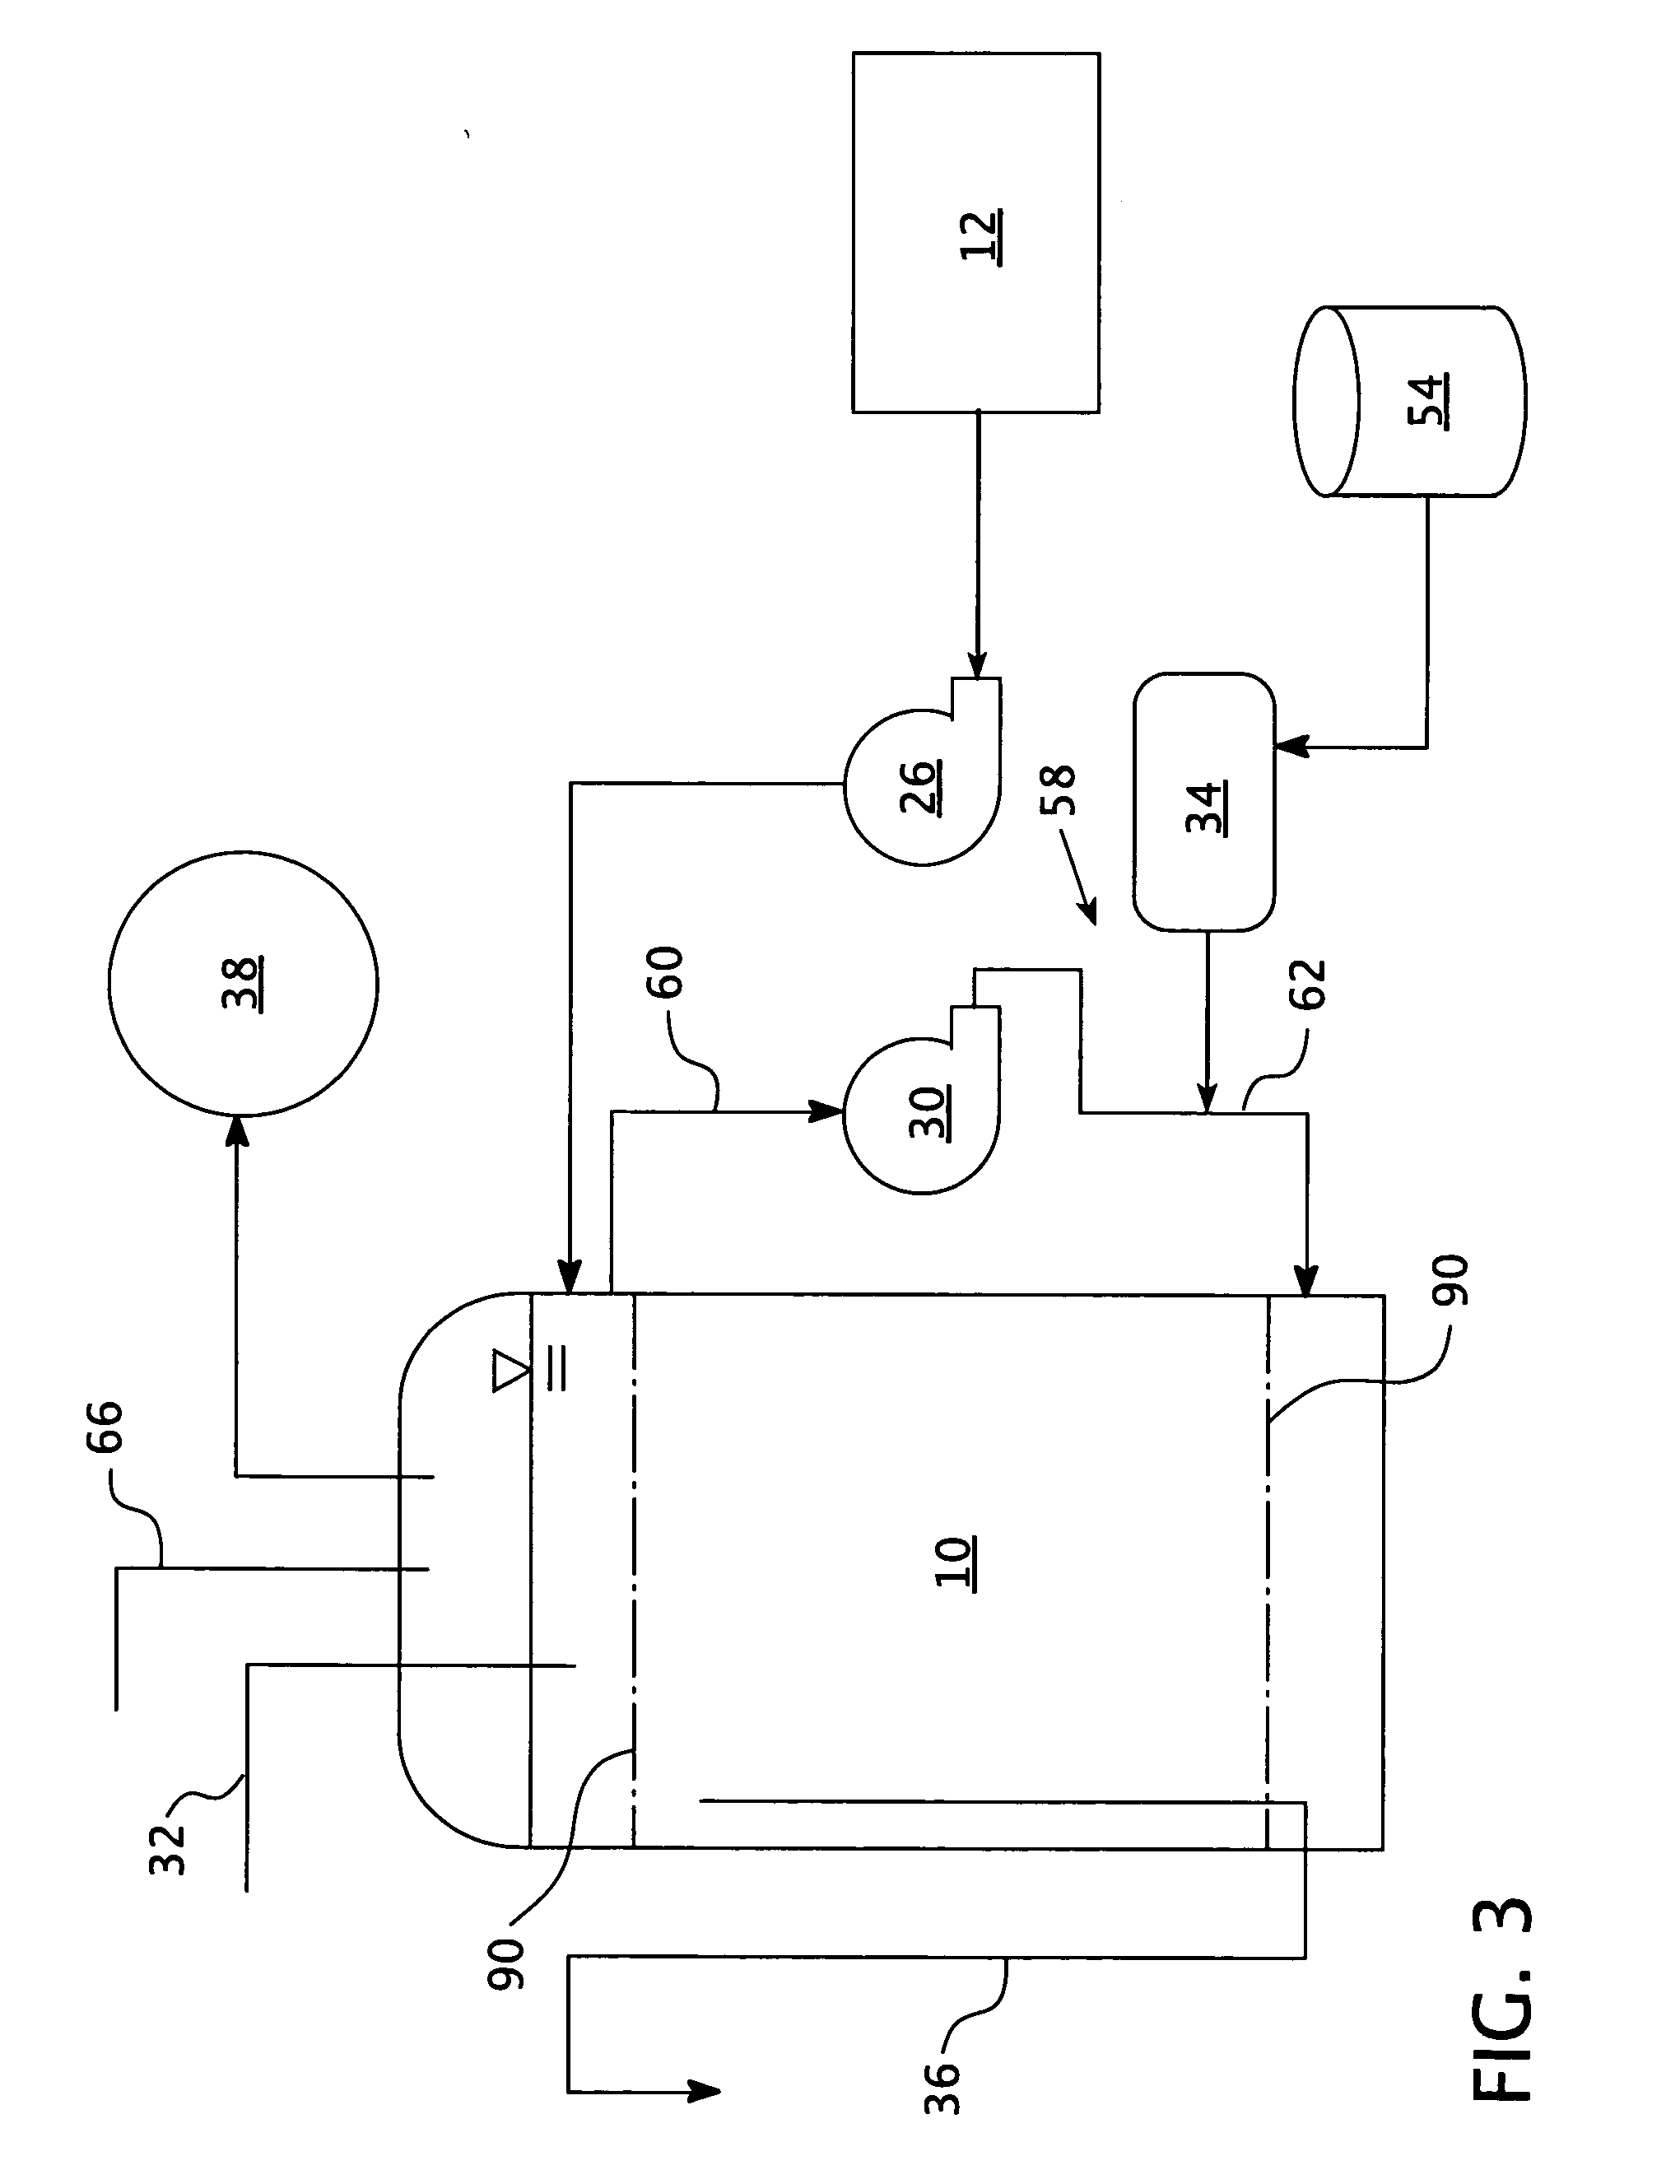 Method for sustained microbial production of hydrogen gas in a bioreactor using klebsiella oxytoca